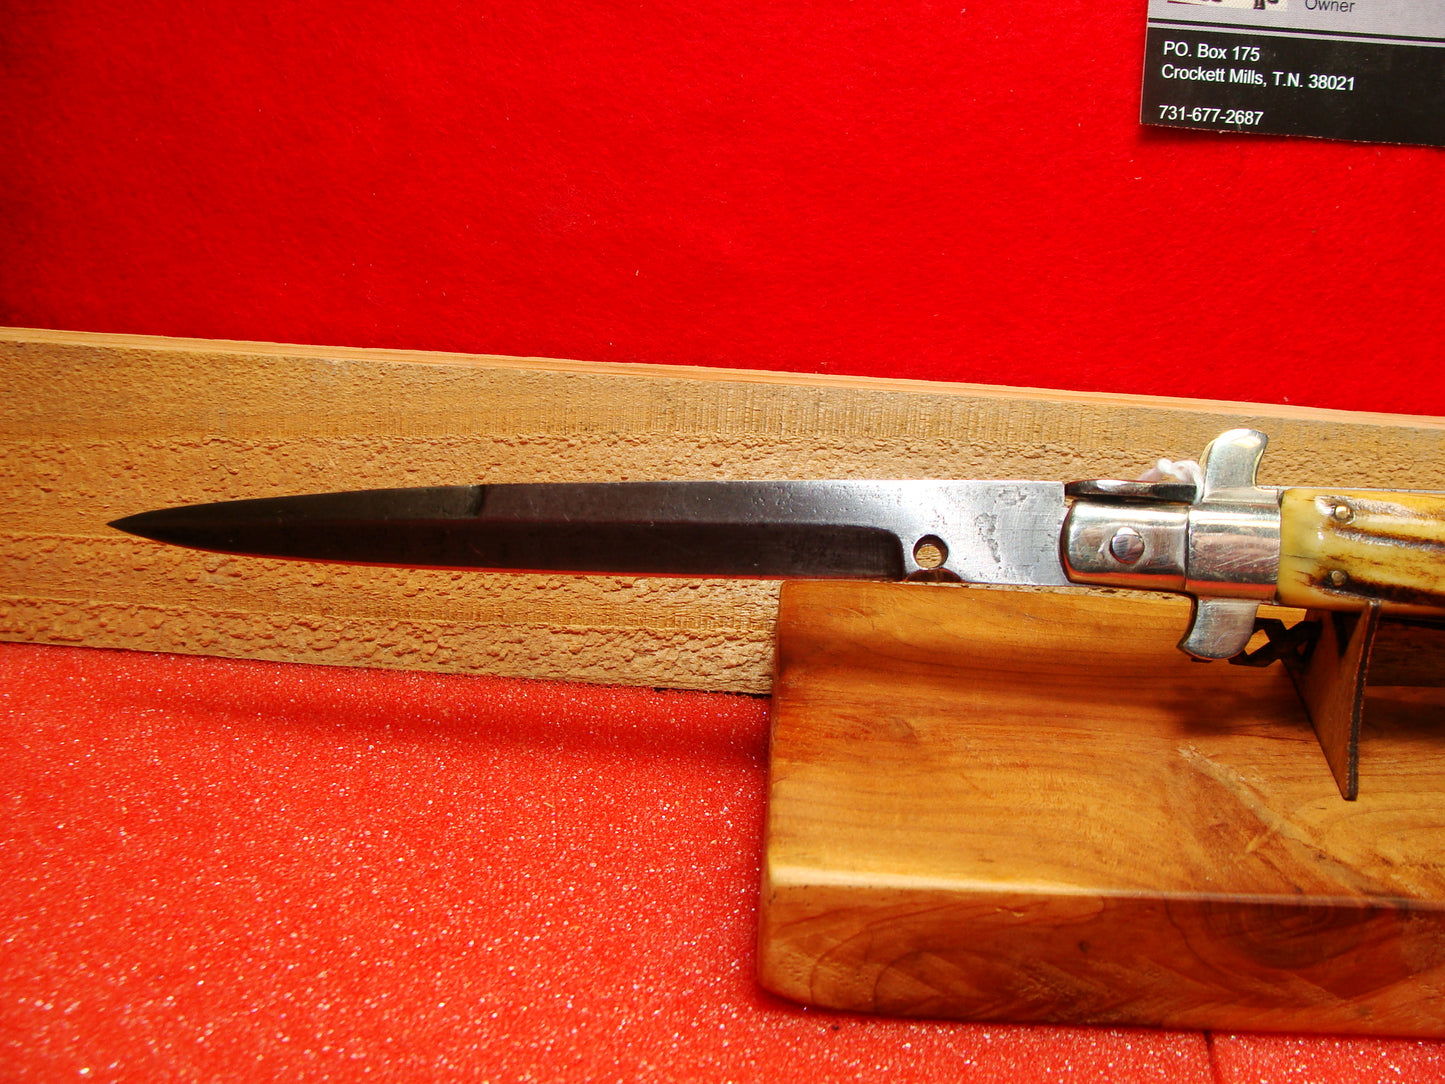 UNMARKED MANIAGO ITALY FLAT GUARD 1920-30 PICK LOCK STILETTO 28 CM ITALIAN AUTOMATIC KNIFE RARE STAG HANDLES